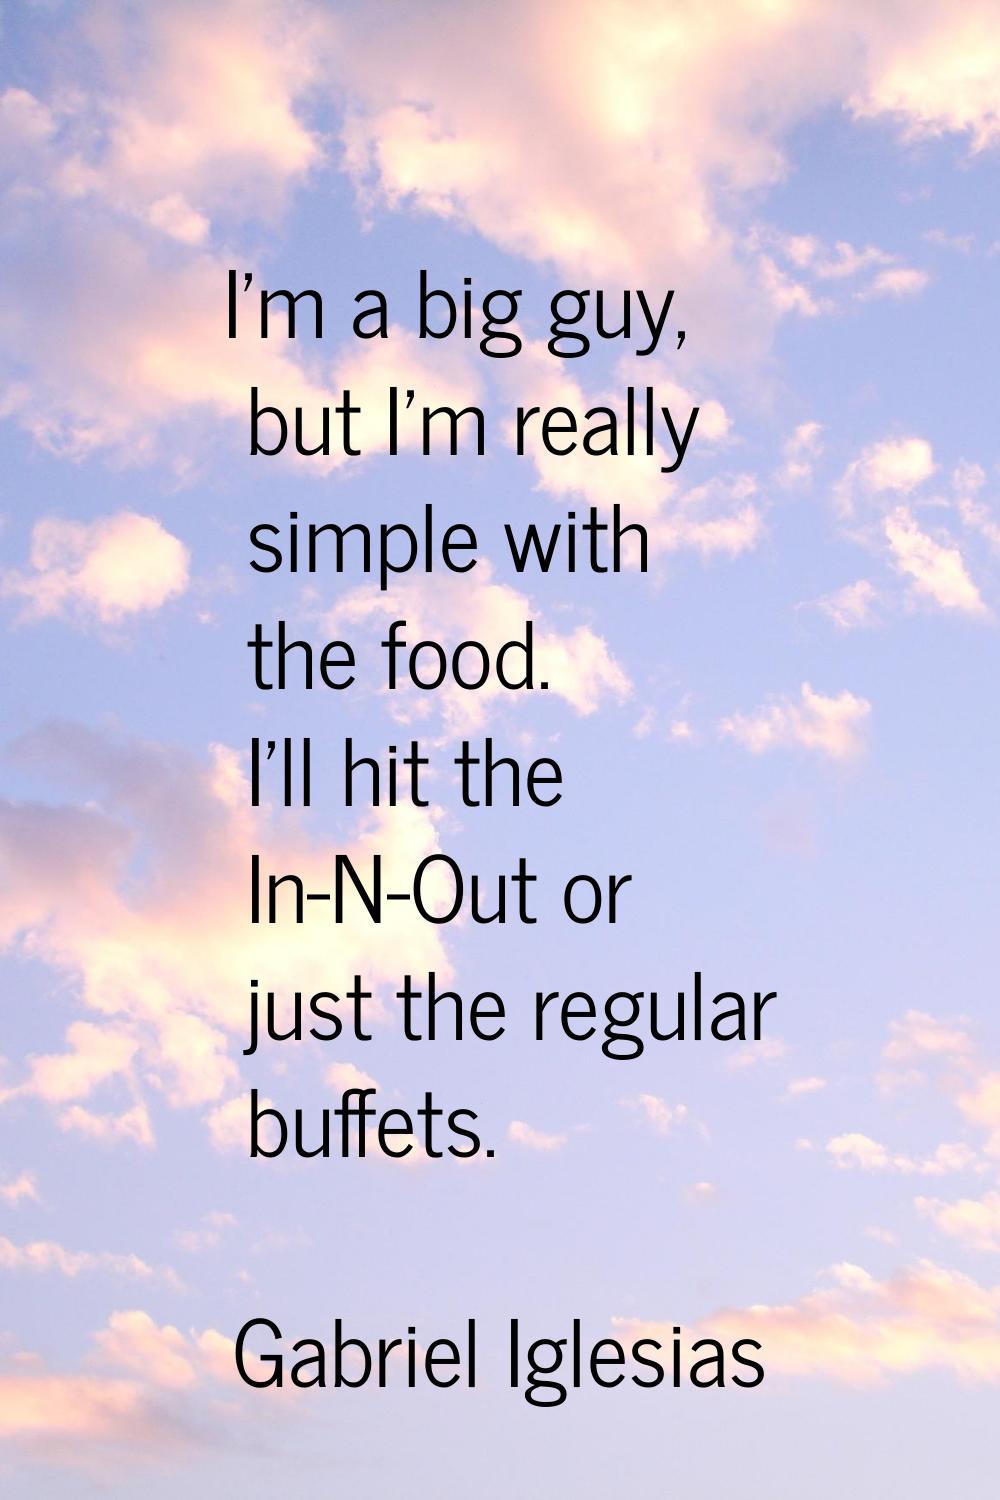 I'm a big guy, but I'm really simple with the food. I'll hit the In-N-Out or just the regular buffe